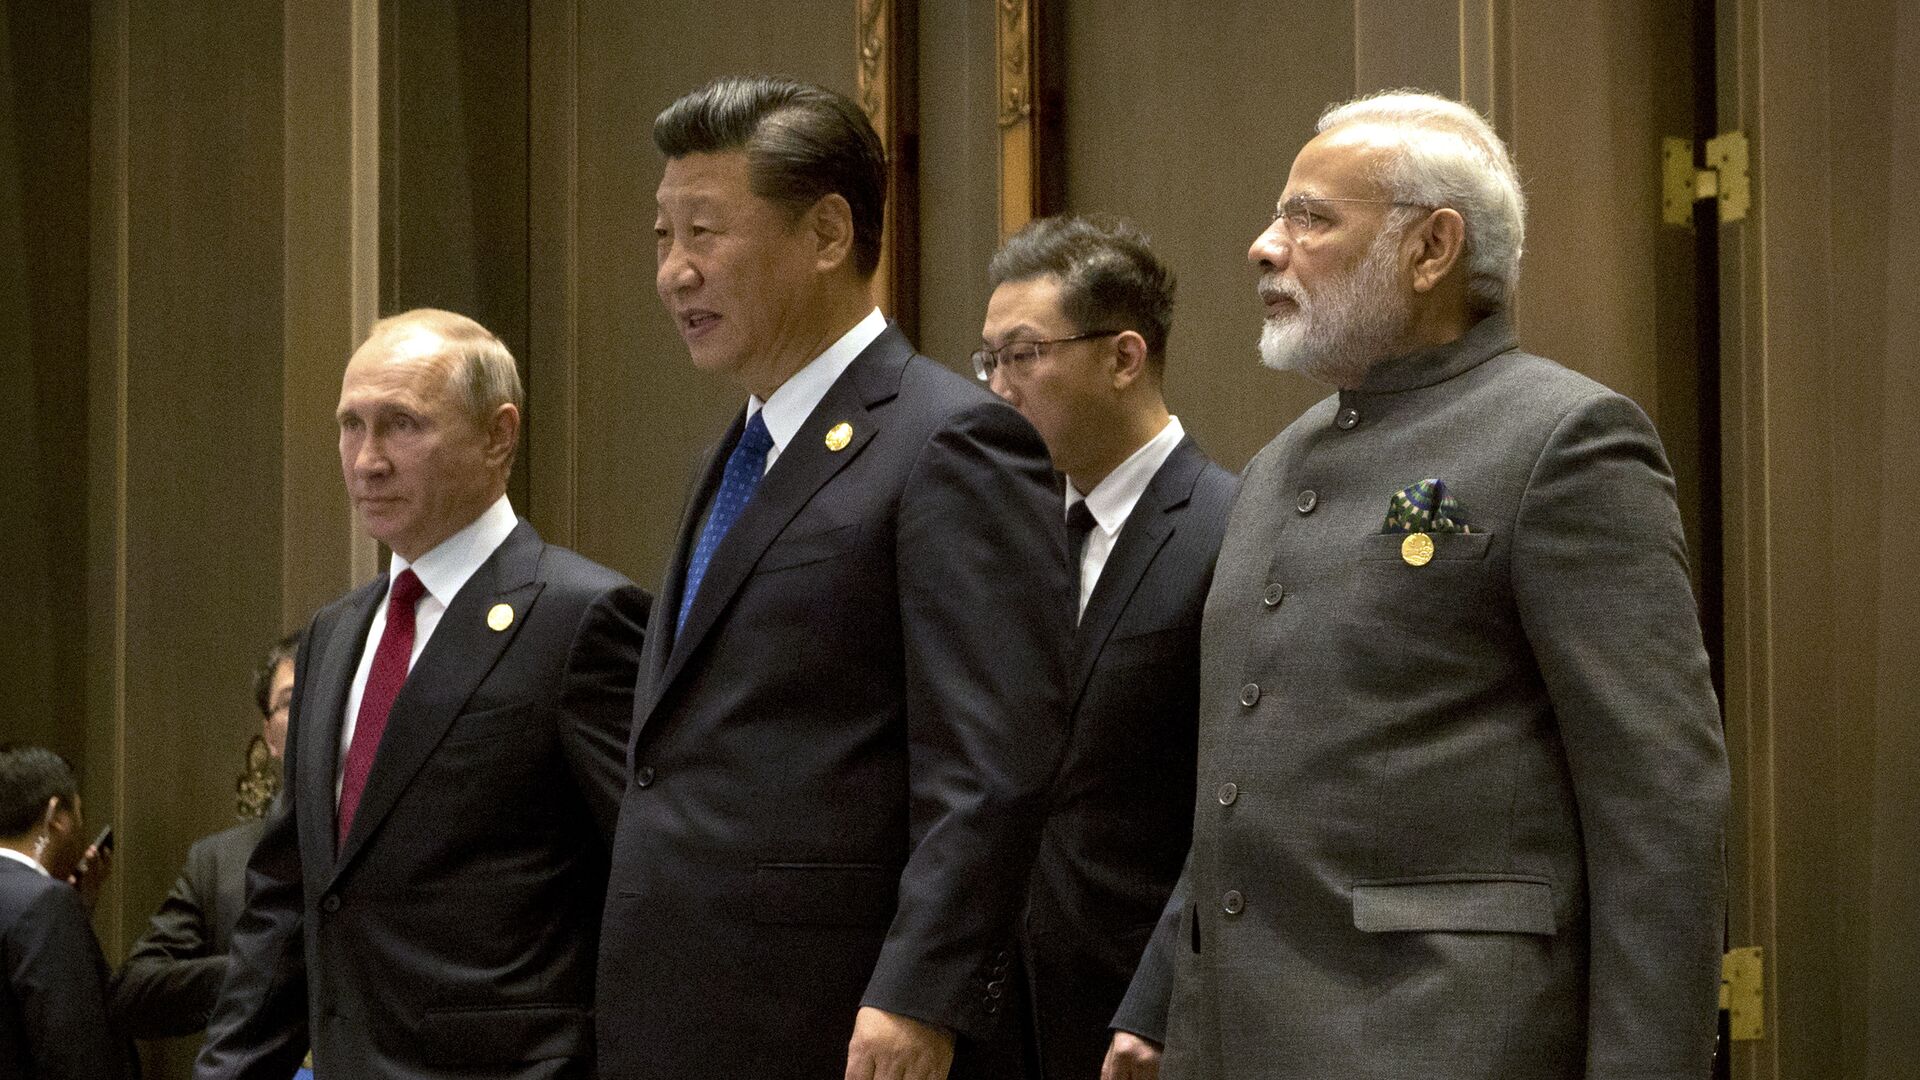 (L to R) Russian President Vladimir Putin, Chinese President Xi Jinping and Indian Prime Minister Narendra Modi arrive for the Dialogue of Emerging Market and Developing Countries on the sidelines of the 2017 BRICS Summit in Xiamen, southeastern China's Fujian Province on September 5, 2017 - Sputnik International, 1920, 09.09.2021